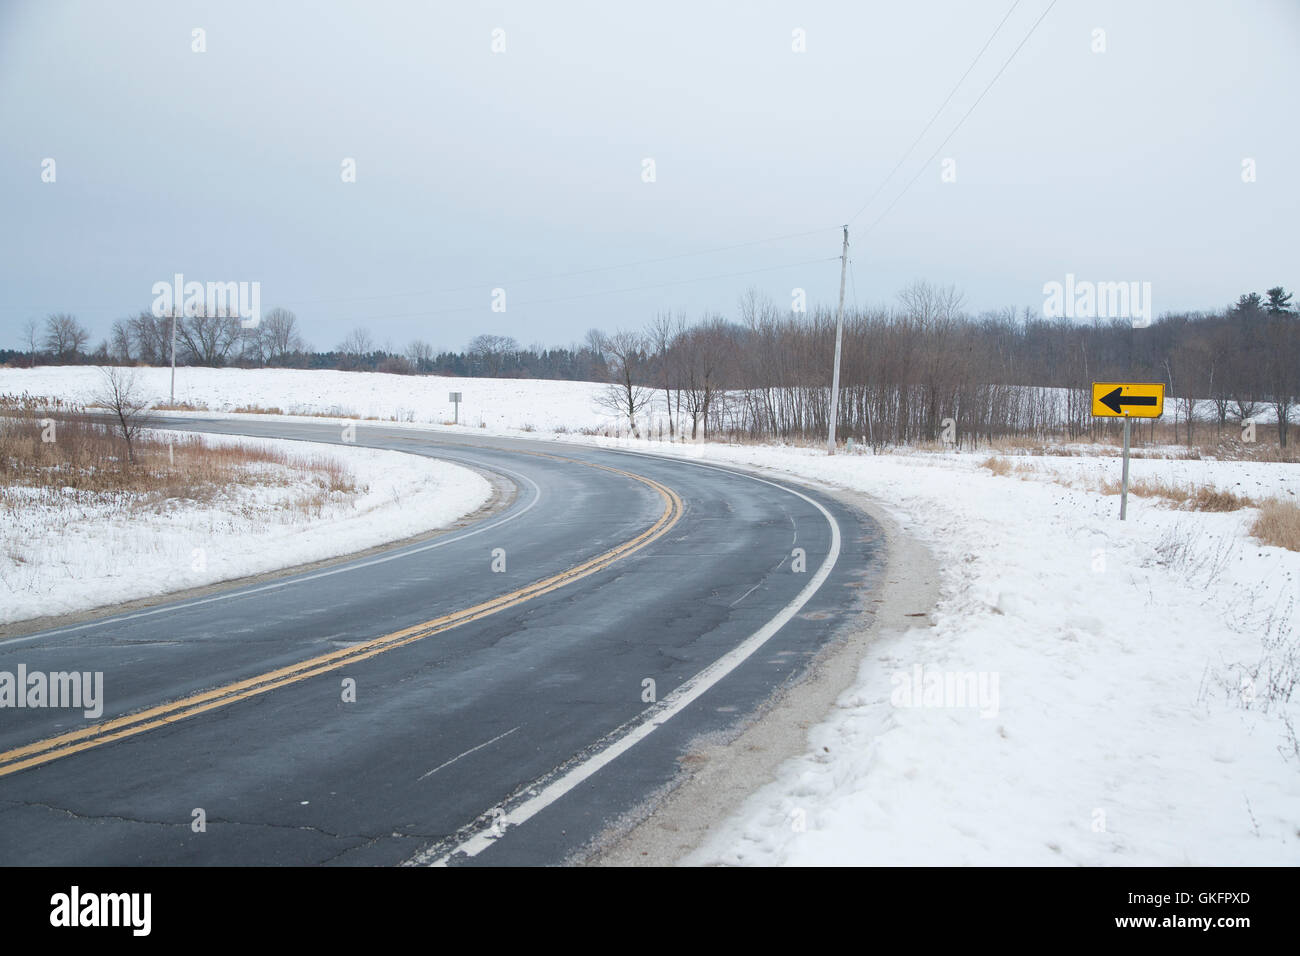 A two lane blacktop road next to a snow covered field curves past an arrow sign on a gray winter day Stock Photo